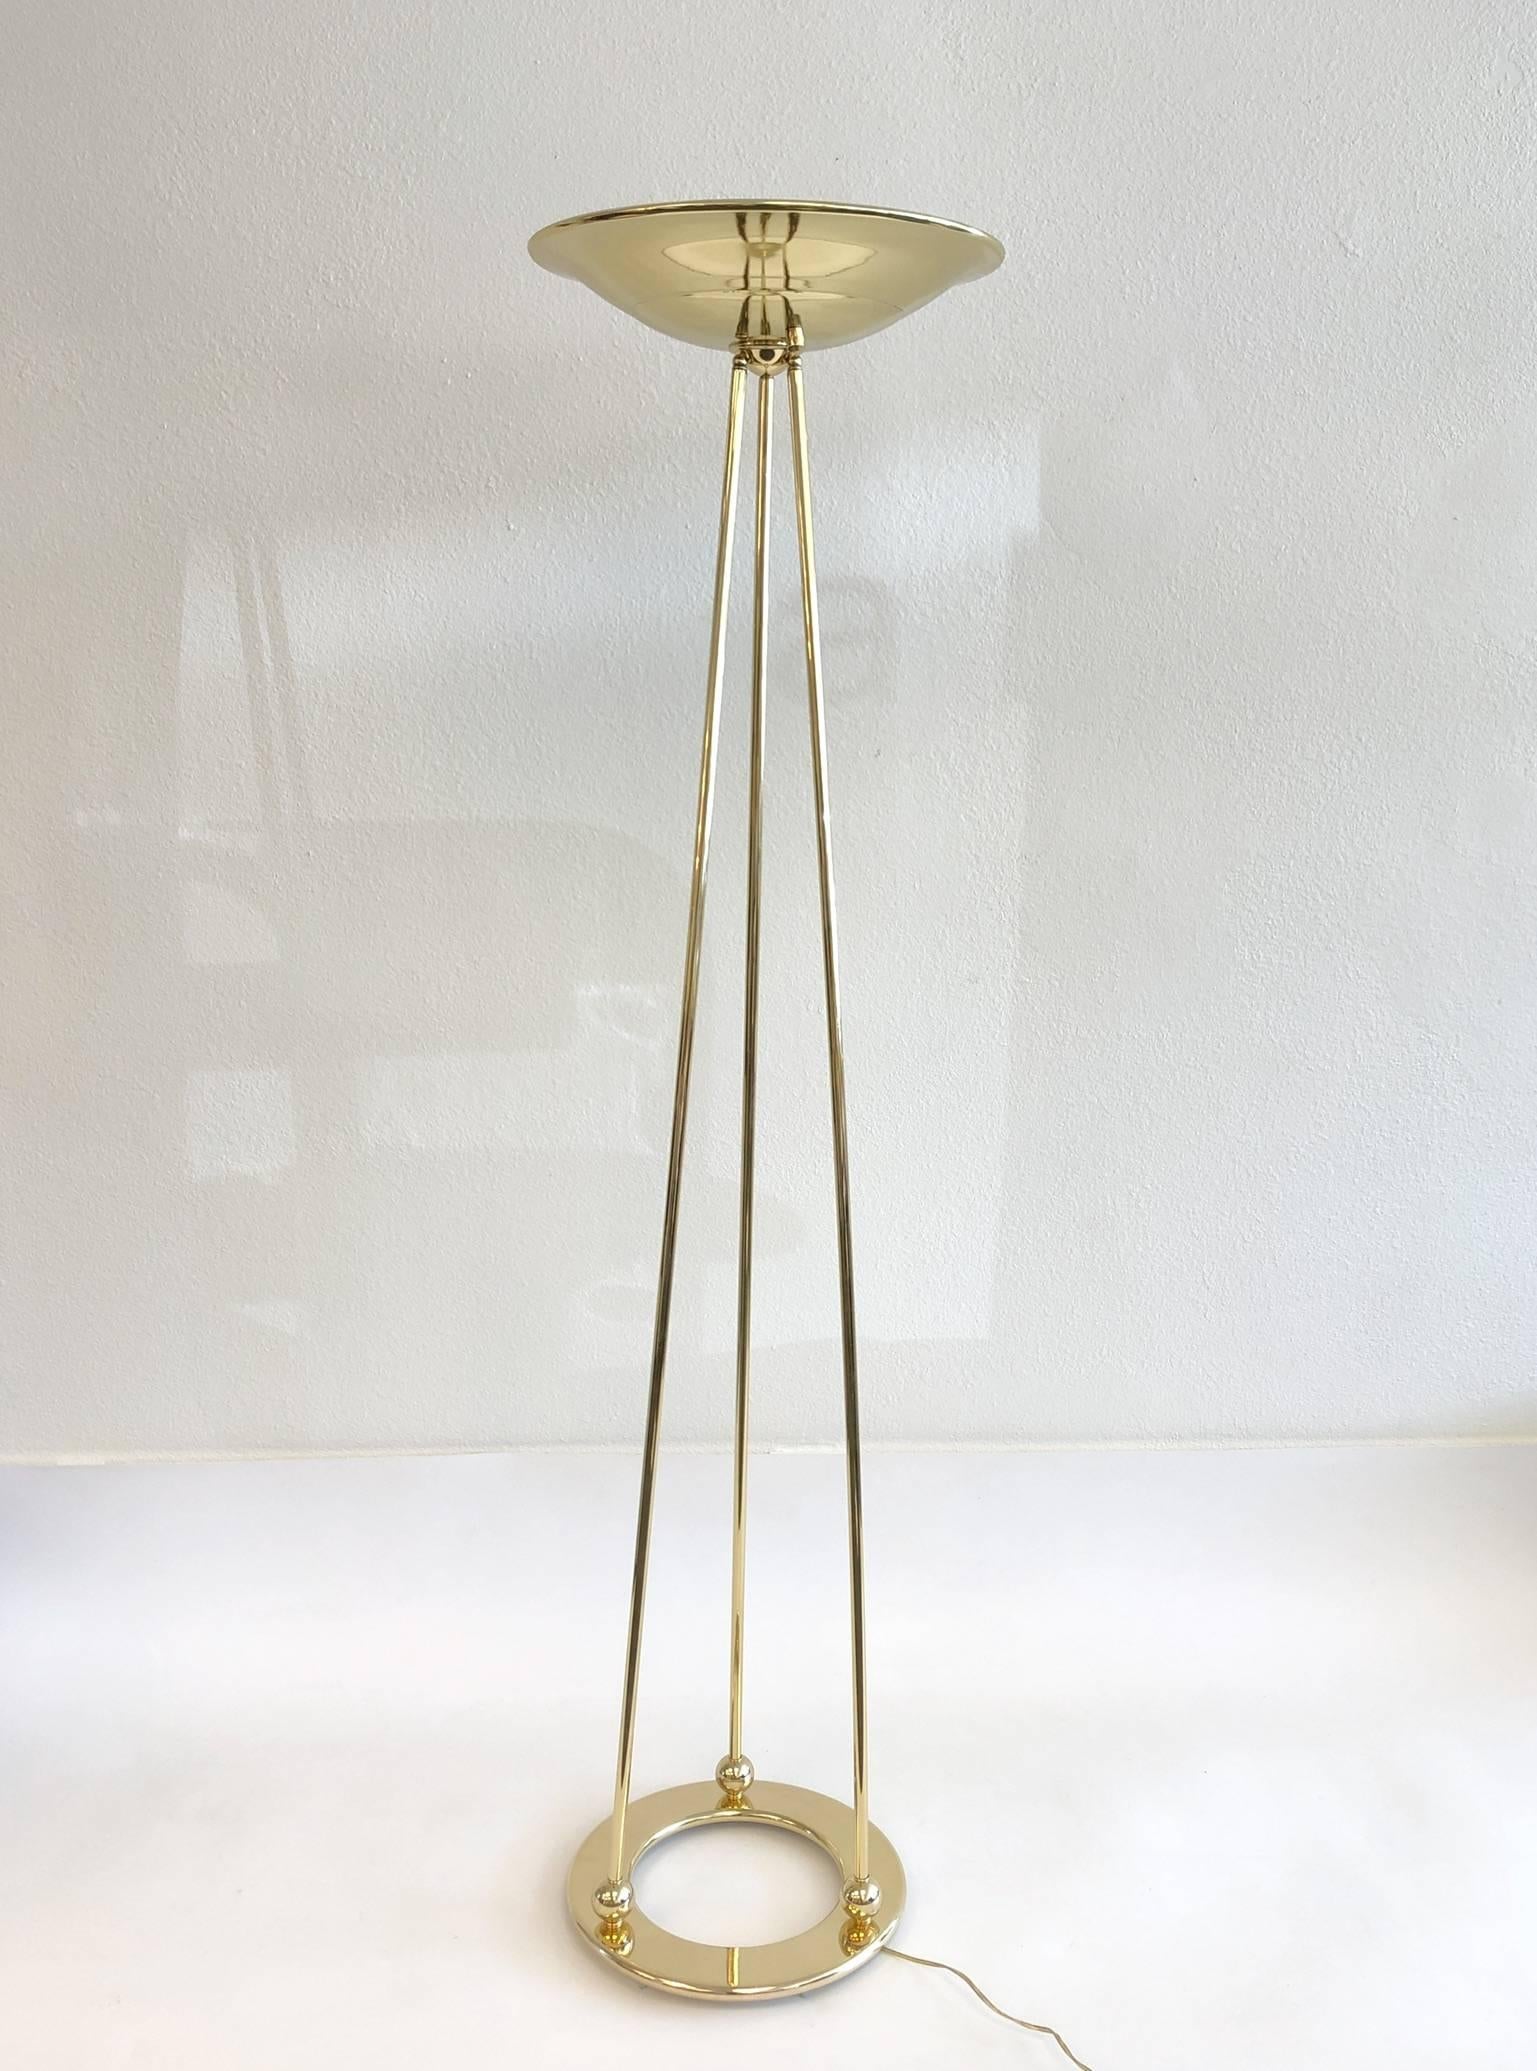 American Pair of Polish Brass Torchiere Floor Lamps by Casella For Sale